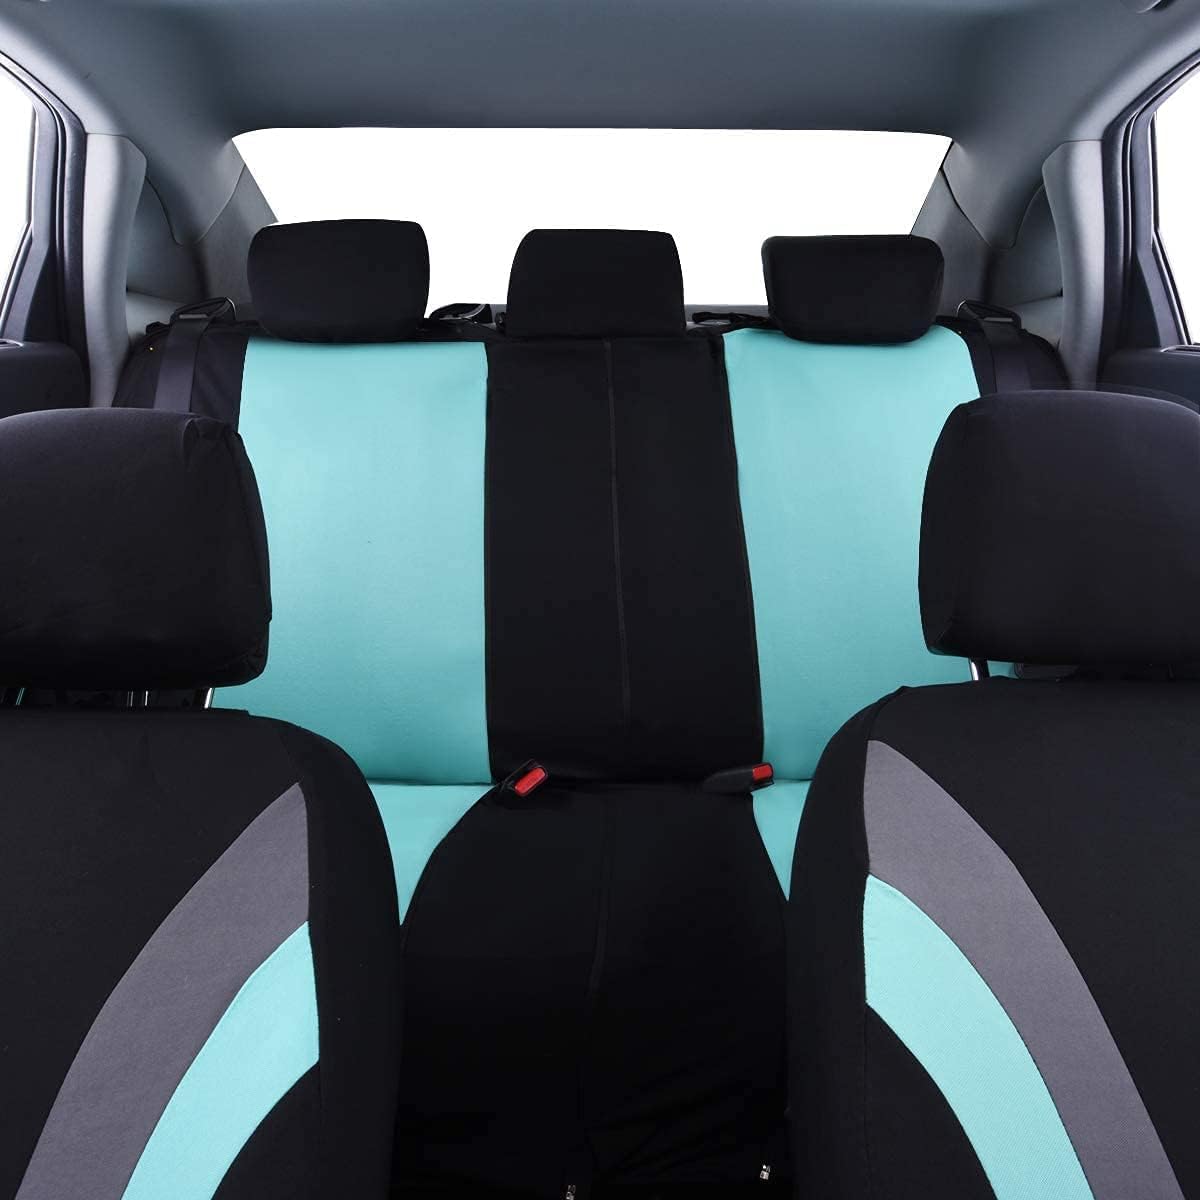 CAR PASS Universal Line Rider 11PCS Car Seat Cover with Waterproof Car Floor Mats with Heel Pad for Car Truck SUV